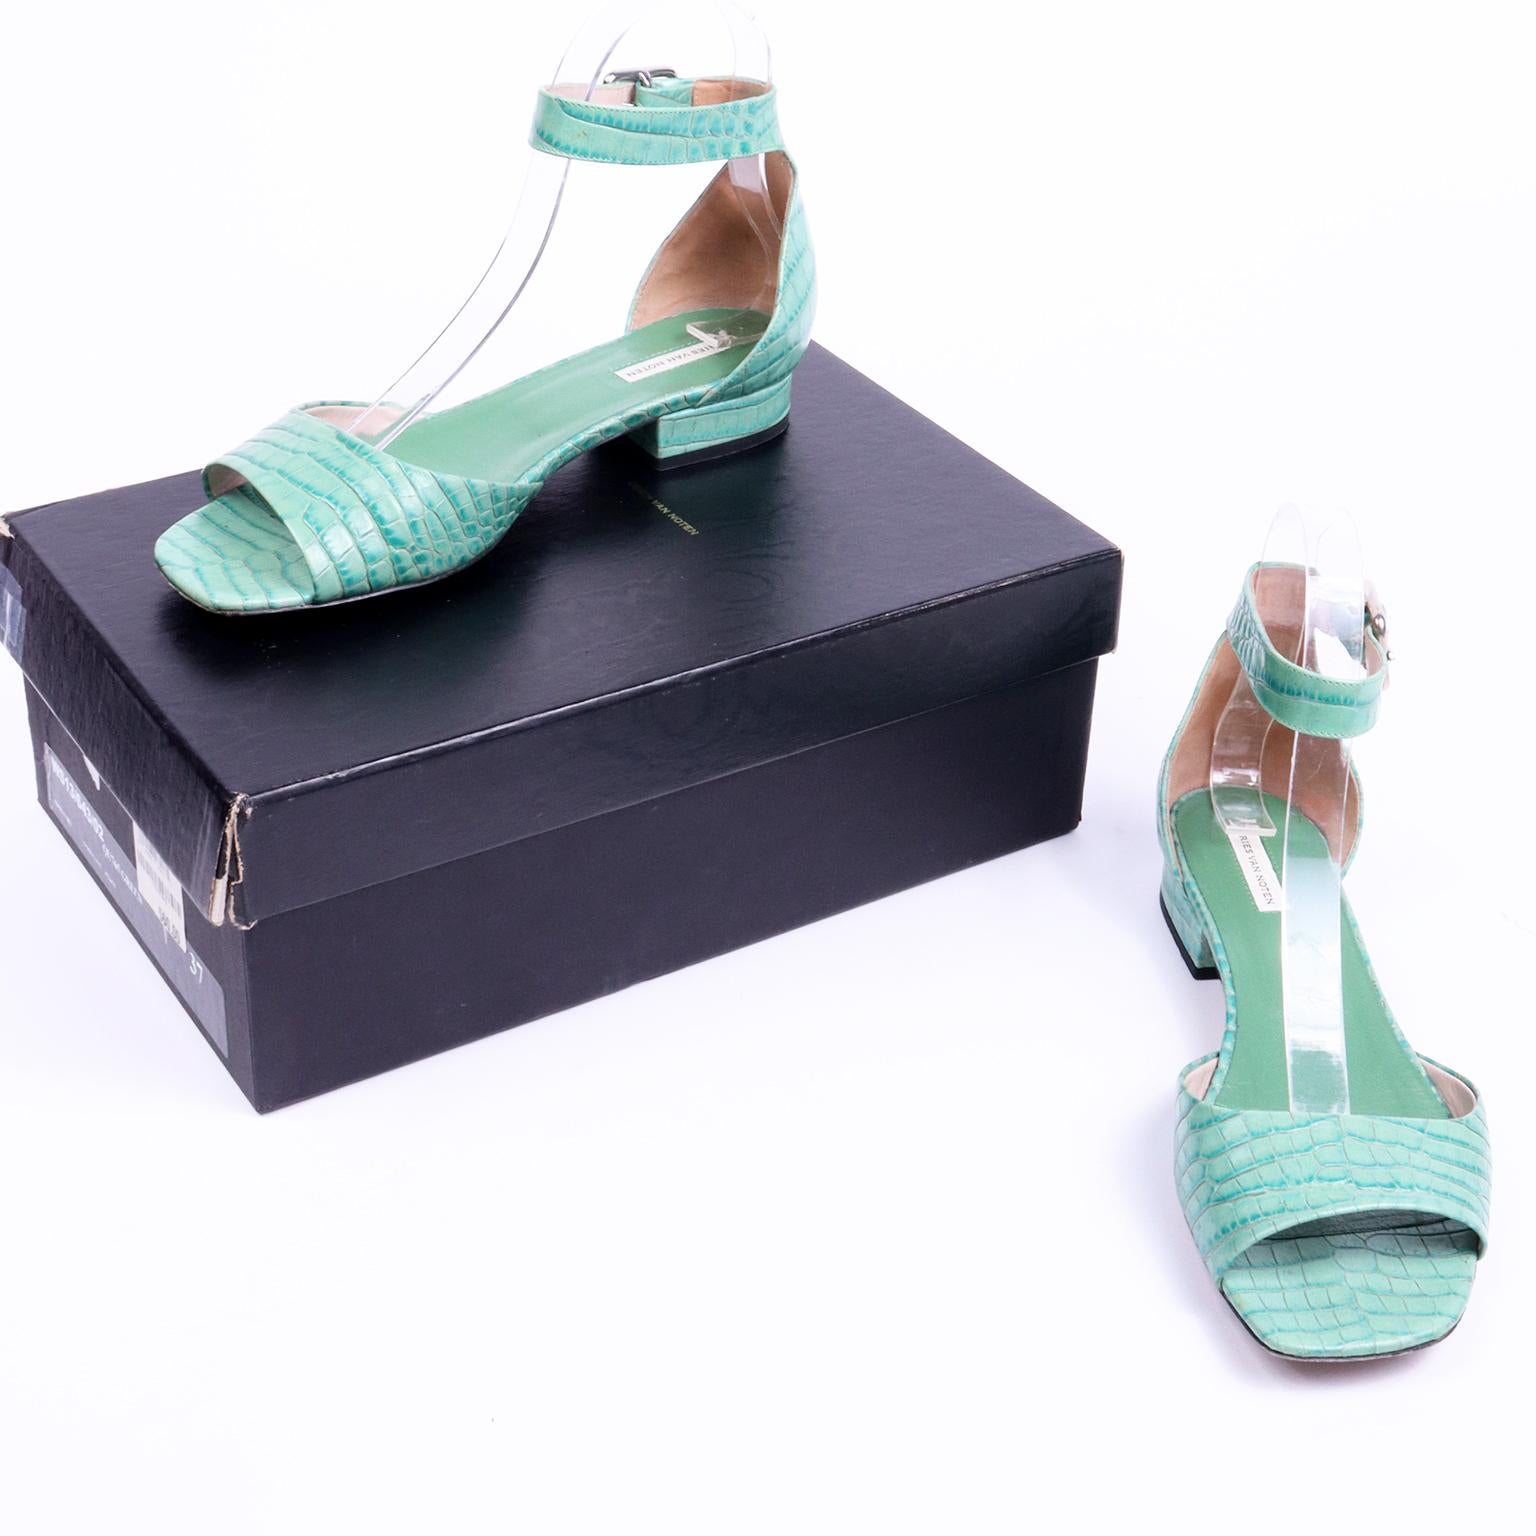 These are great vintage green Dries Van Noten alligator embossed leather sandals with ankle straps. The shoes are marked a size 37 and they have a nice low heel, open toes and silver buckles.  These originally retailed for $560 in the early 2000's